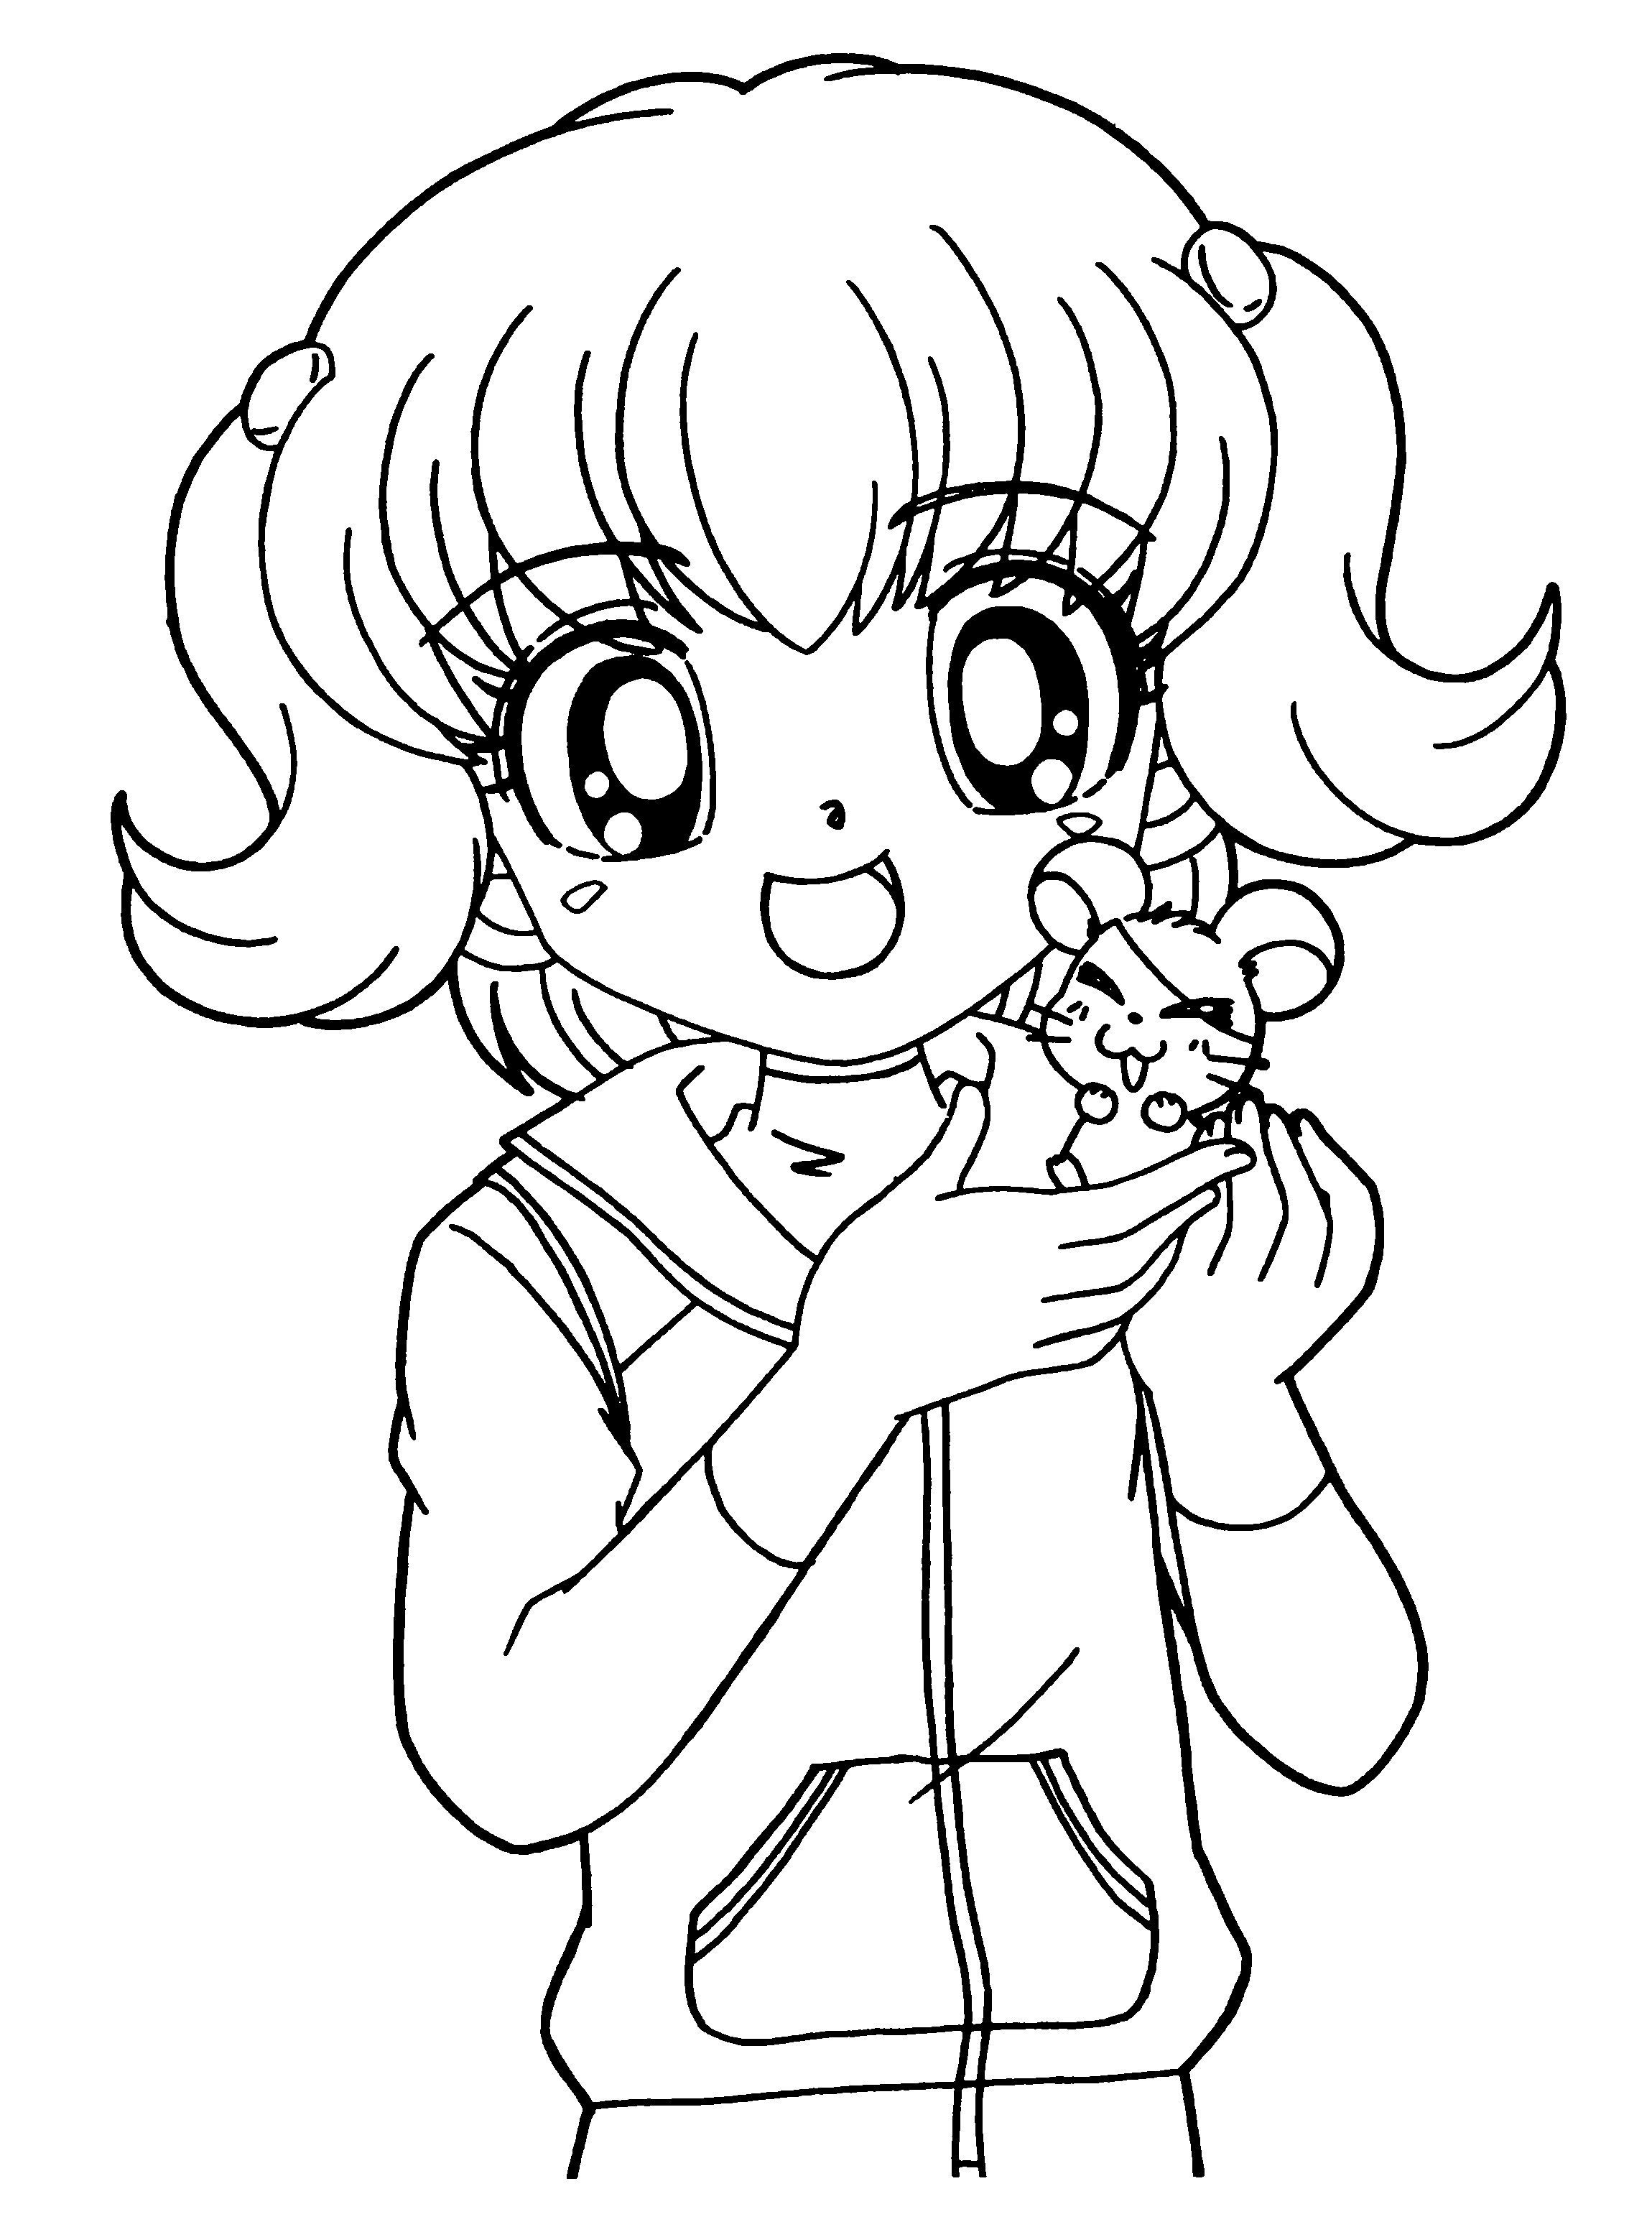 Coloring Sheets For Girls To Prin
 Anime Coloring Pages Best Coloring Pages For Kids